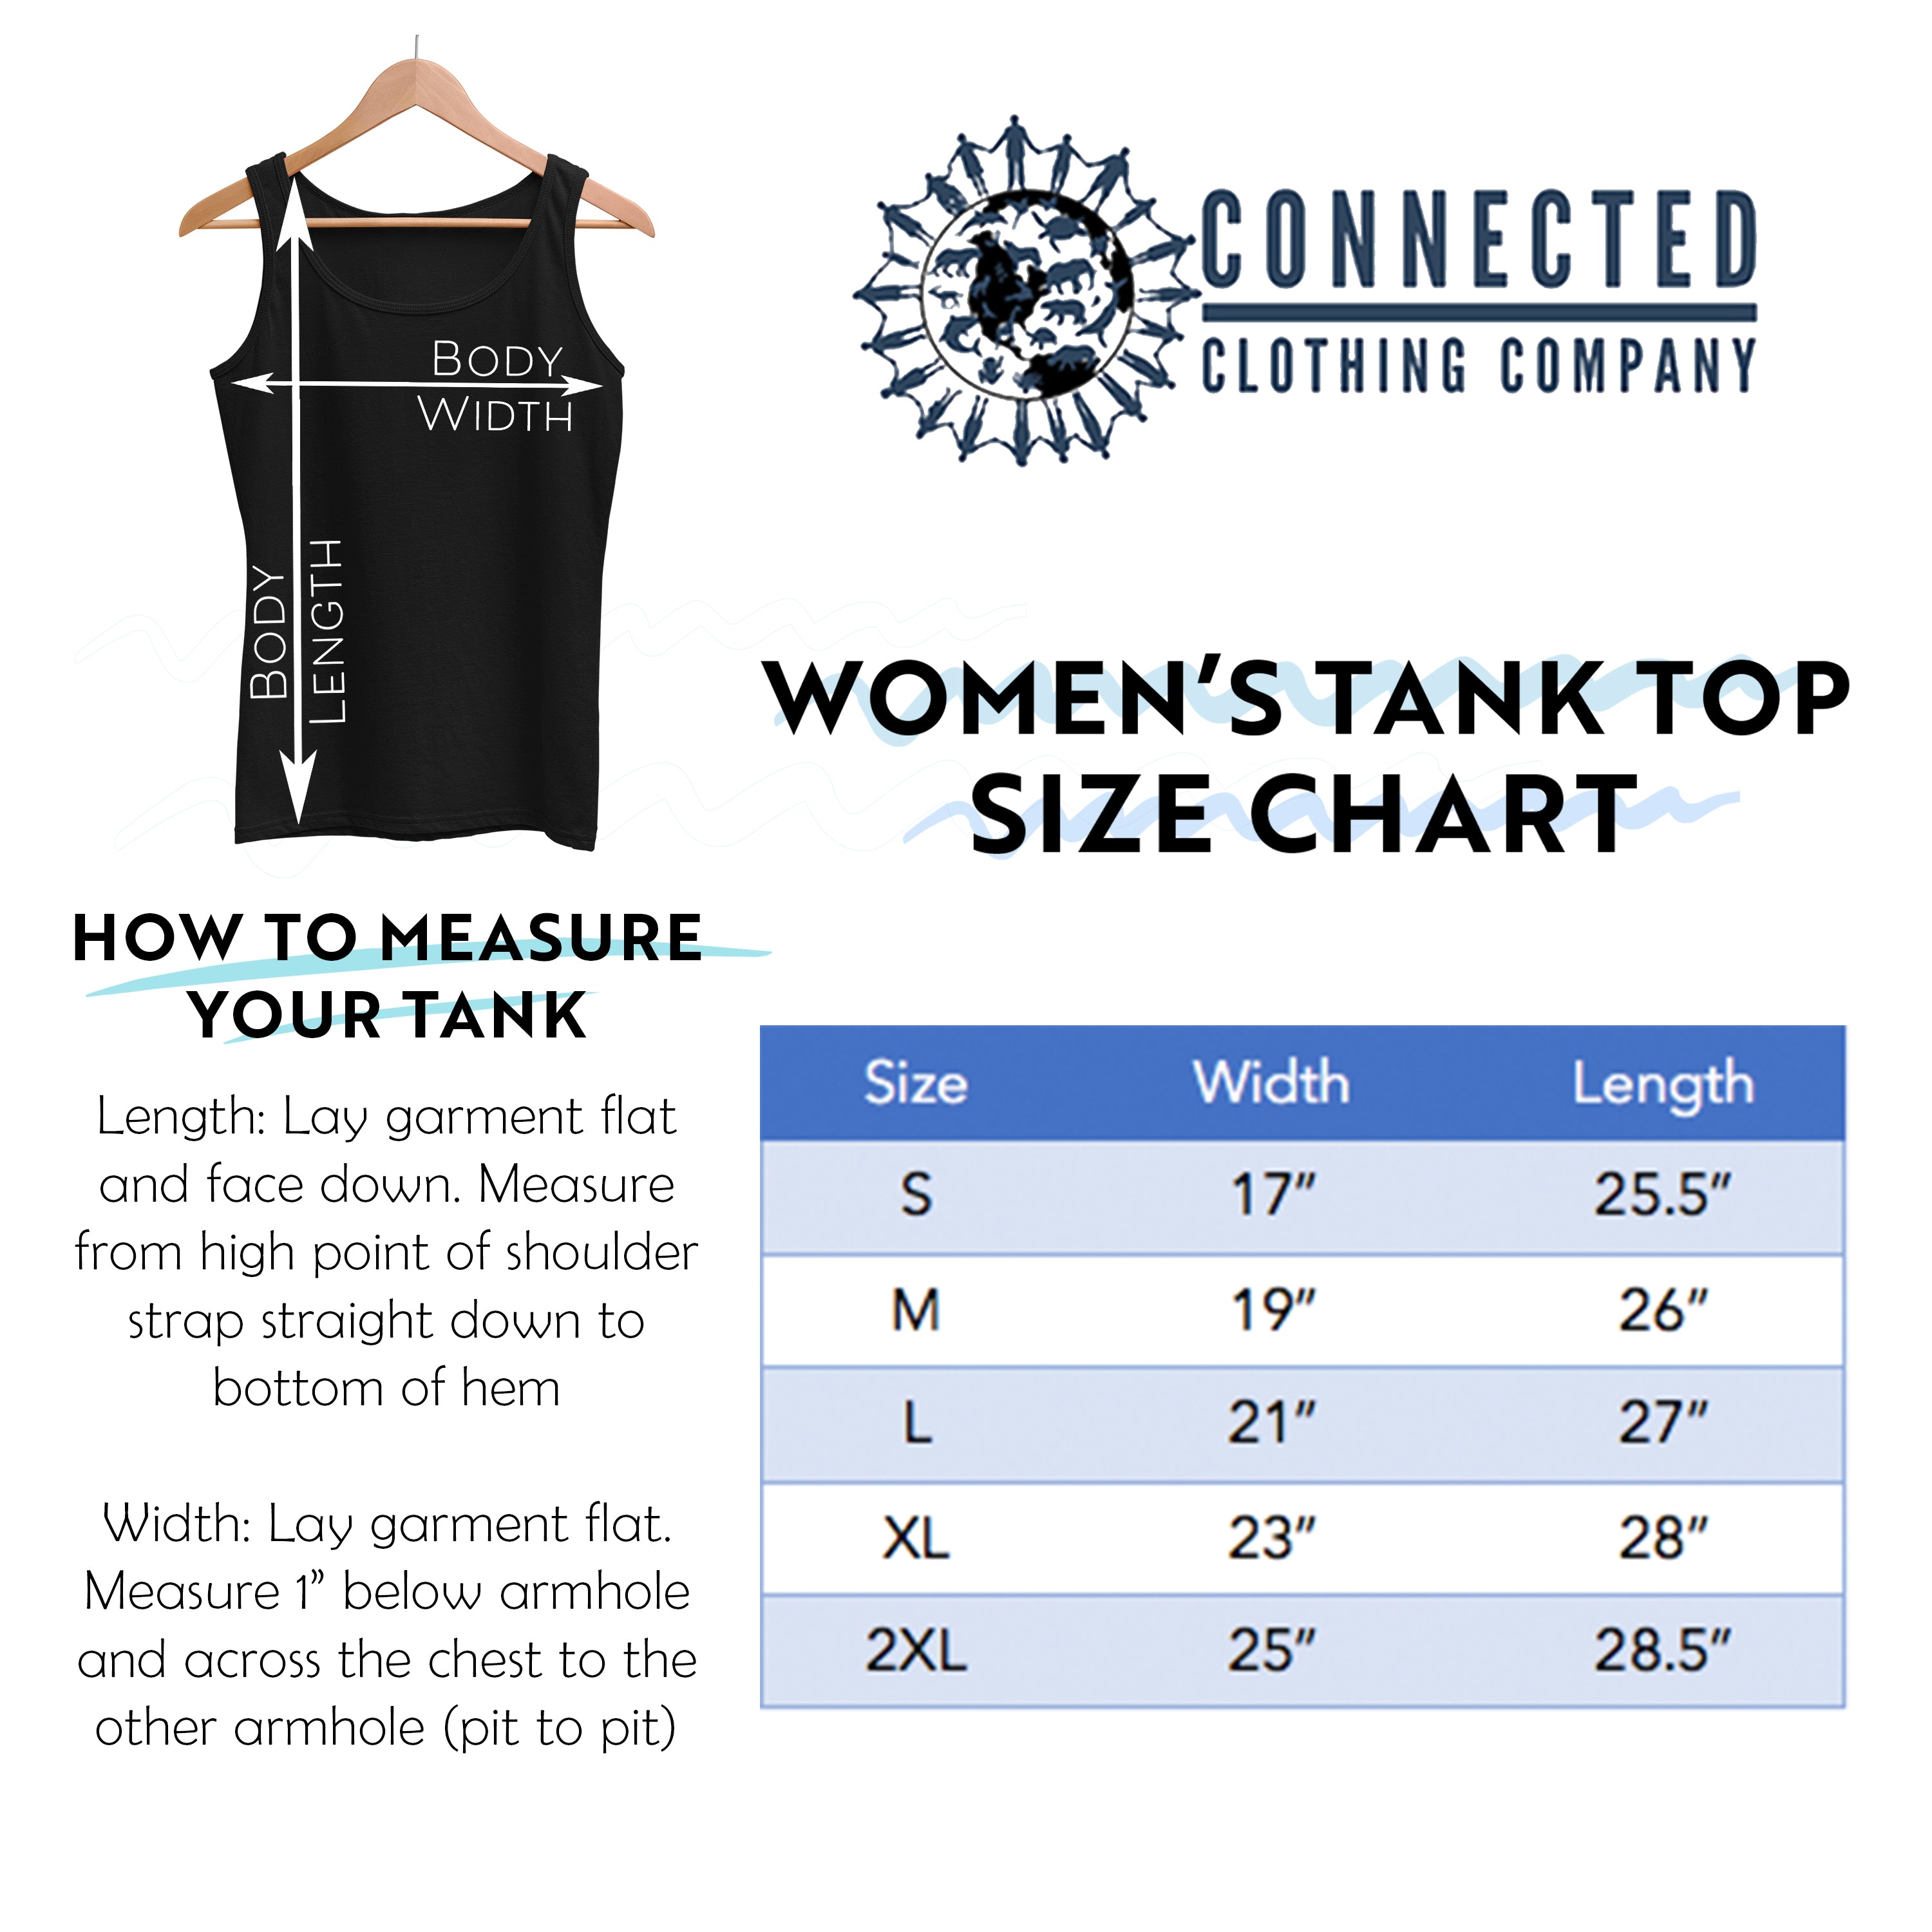 Women's Relaxed Tank Top Size Chart - chinesemandaringarden - Ethically and Sustainably Made - 10% donated to Mission Blue ocean conservation